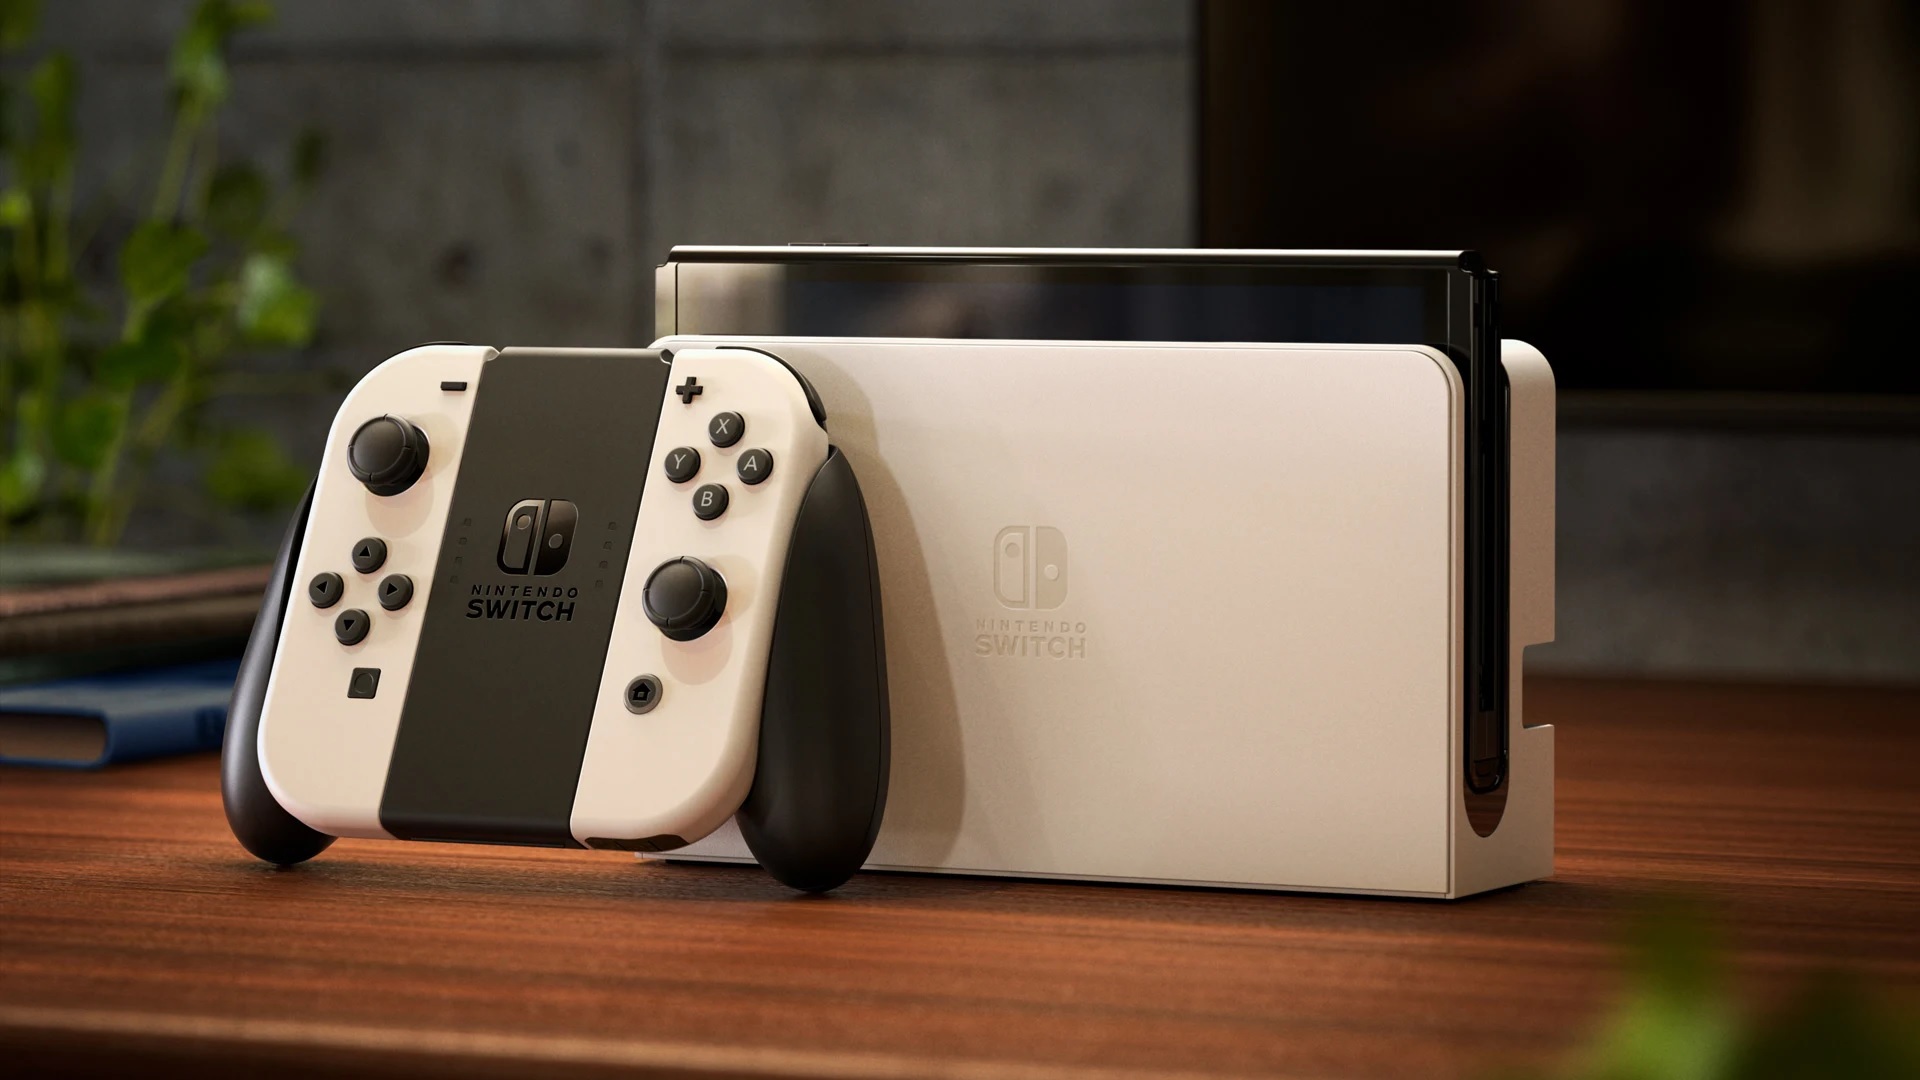 Nintendo Switch Price Drops in Europe Ahead of OLED Model Launch – Gameranx